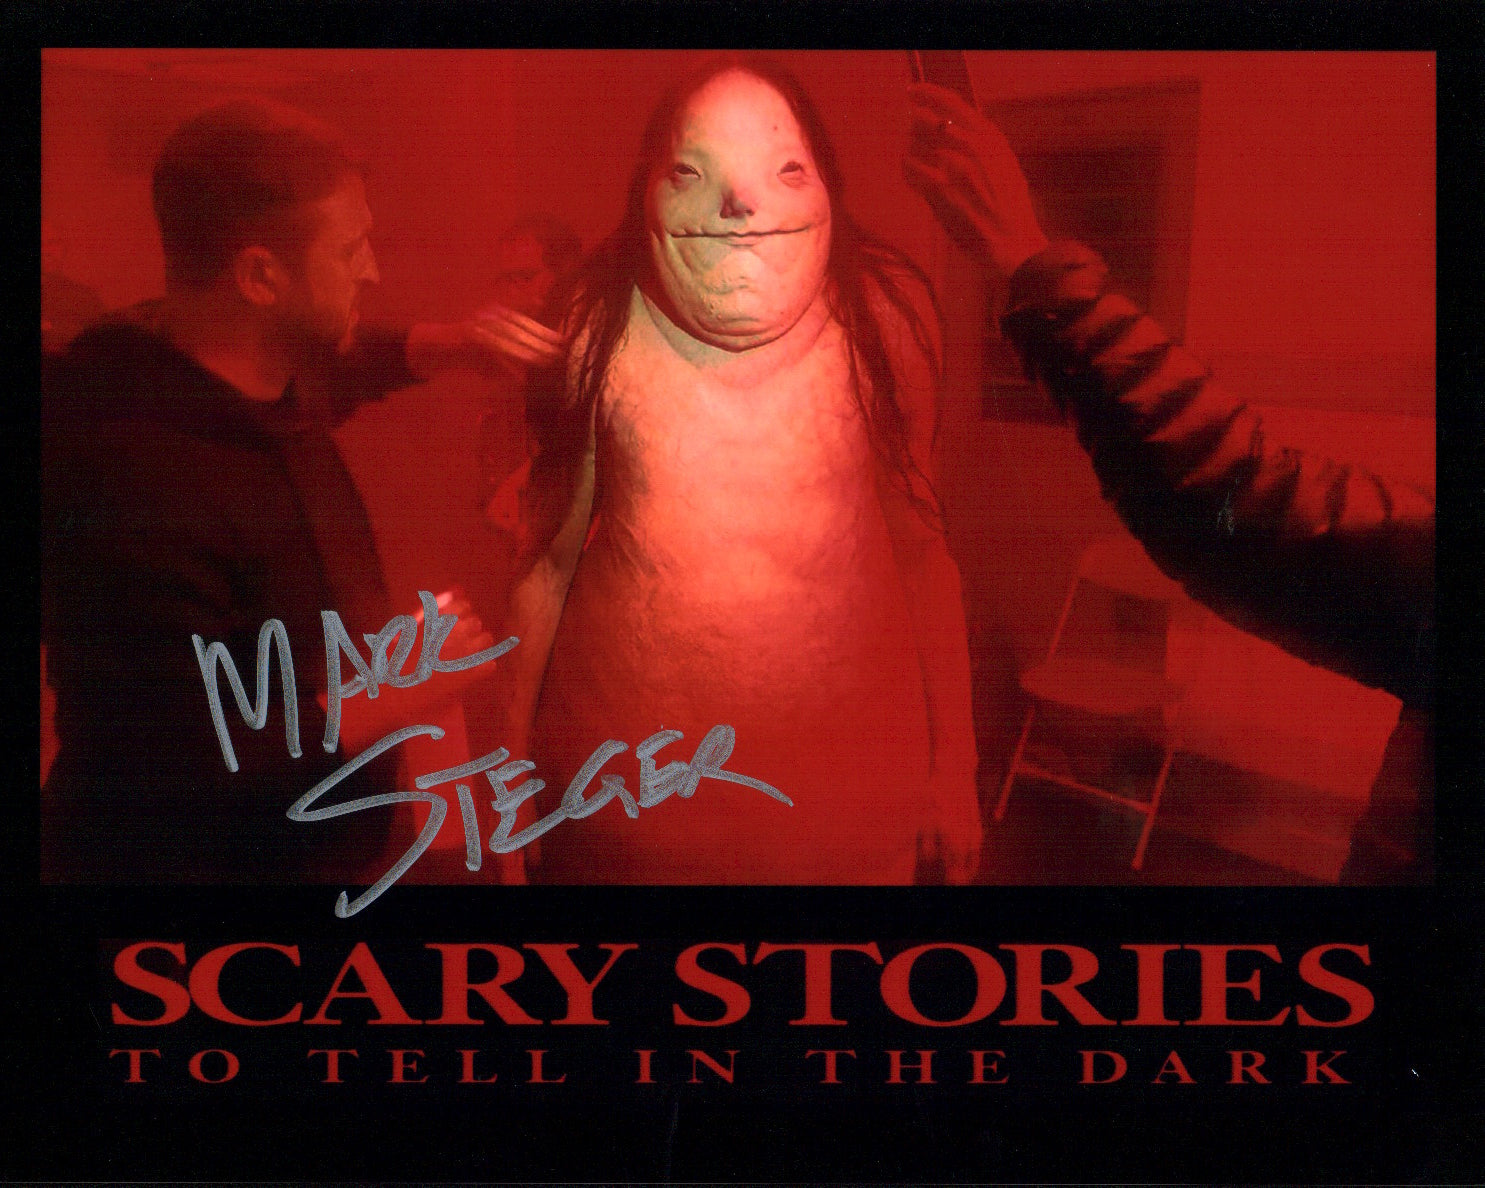 Mark Steger Scary Stories to Tell in the Dark 8x10 Signed Photo JSA Certified Autograph